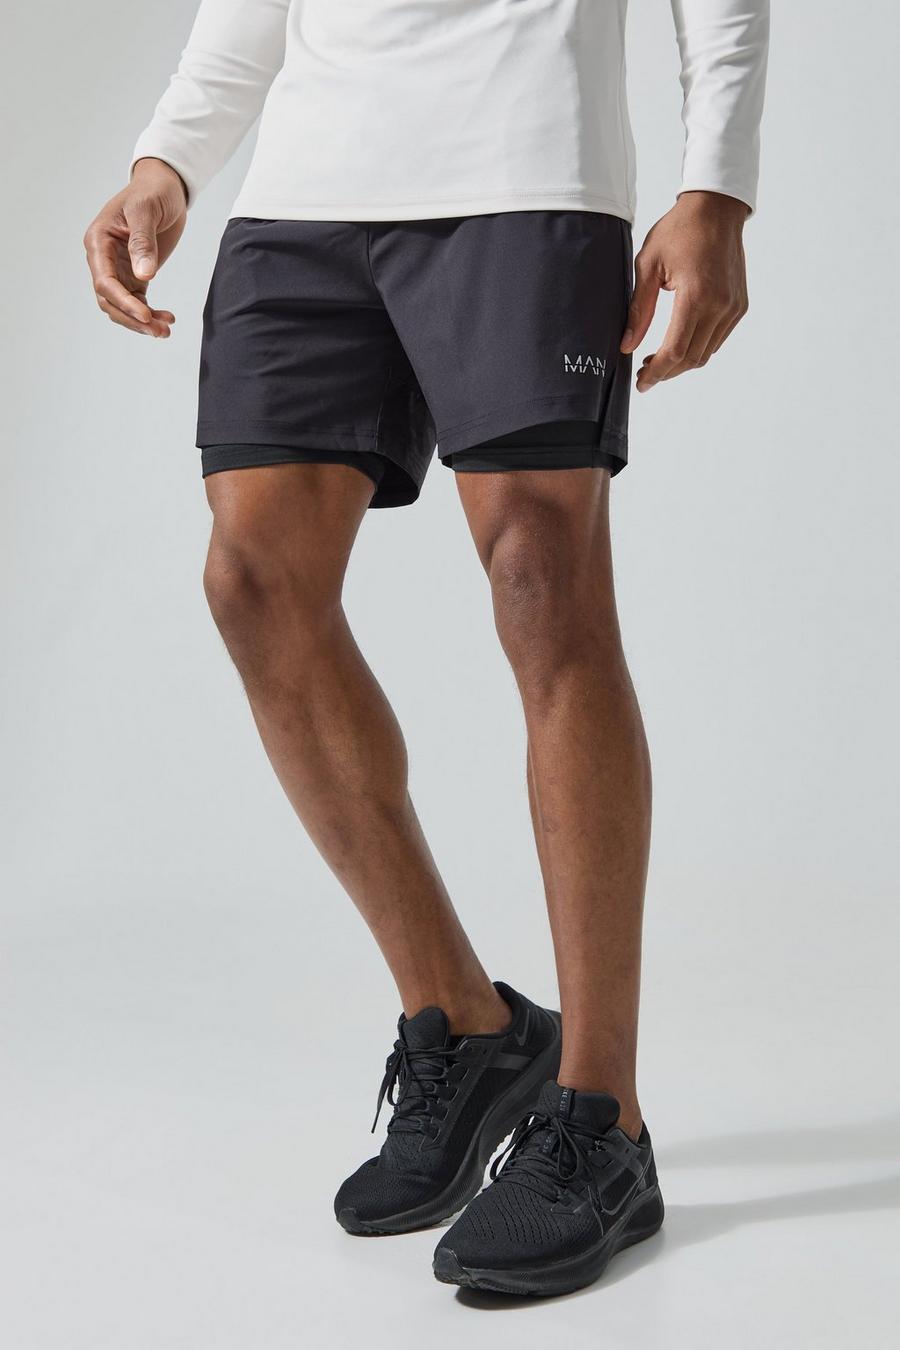 Man Active 2-in-1 Camouflage Shorts, Black image number 1